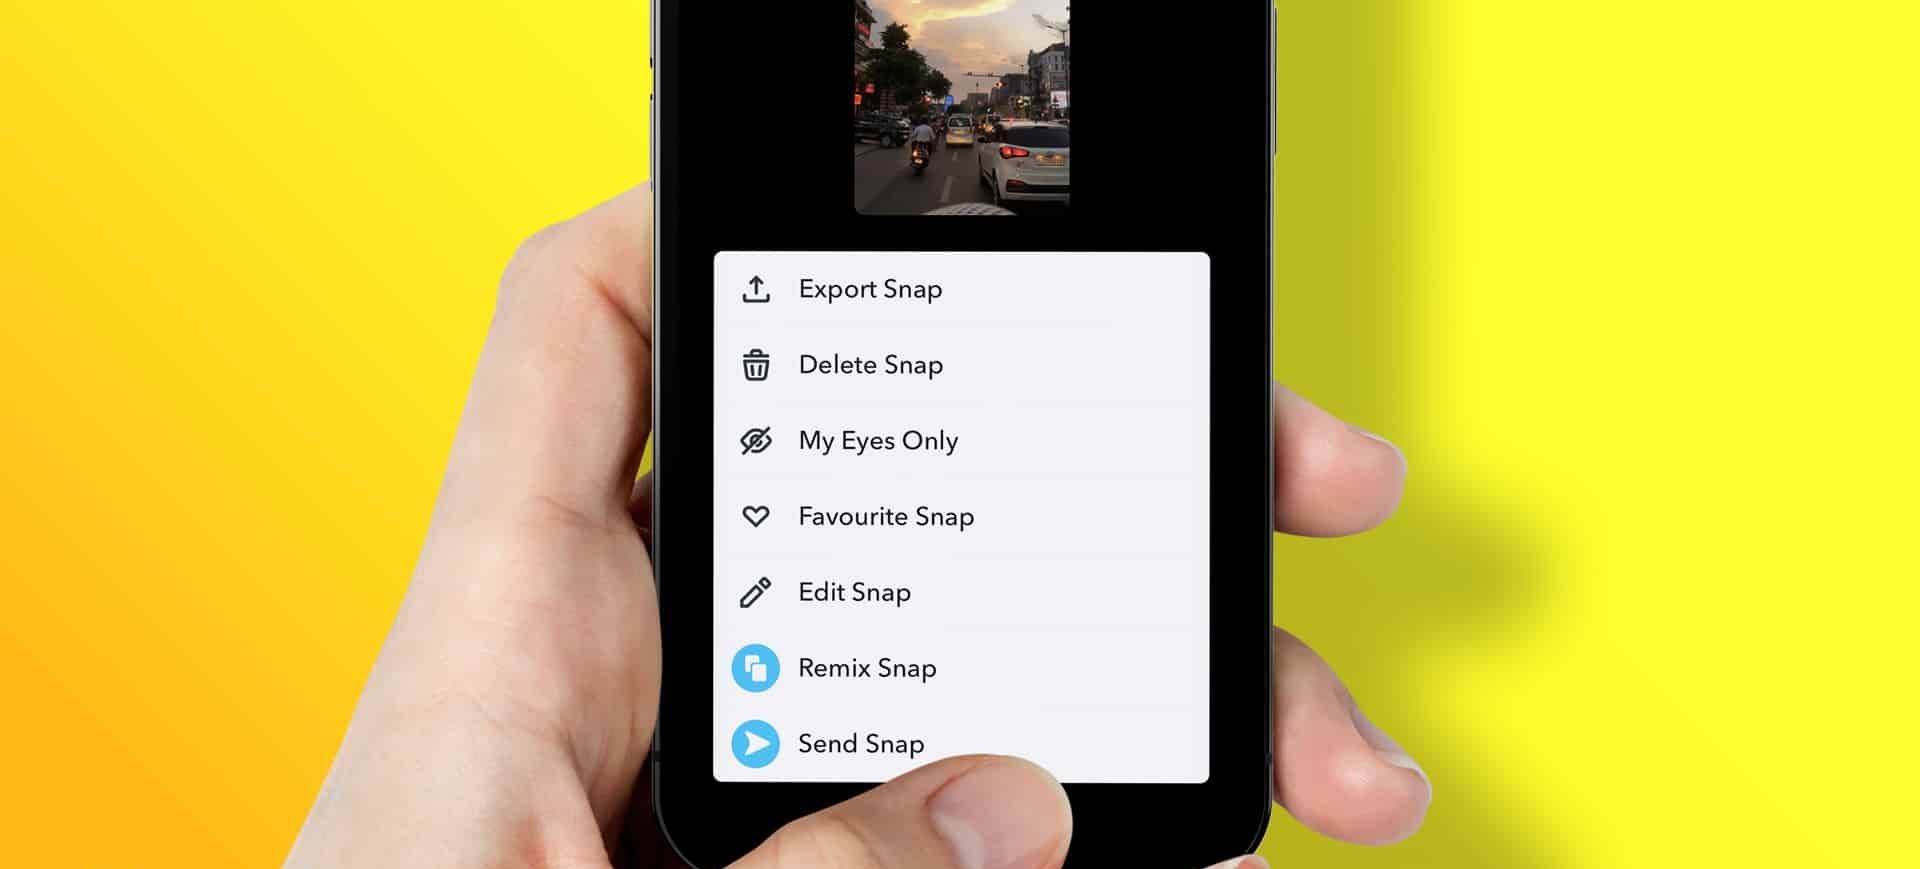 Remix Snap feature is being rolled out and many of the social media platform's users are wondering does remix Snap notify the owner of the original Snap that...